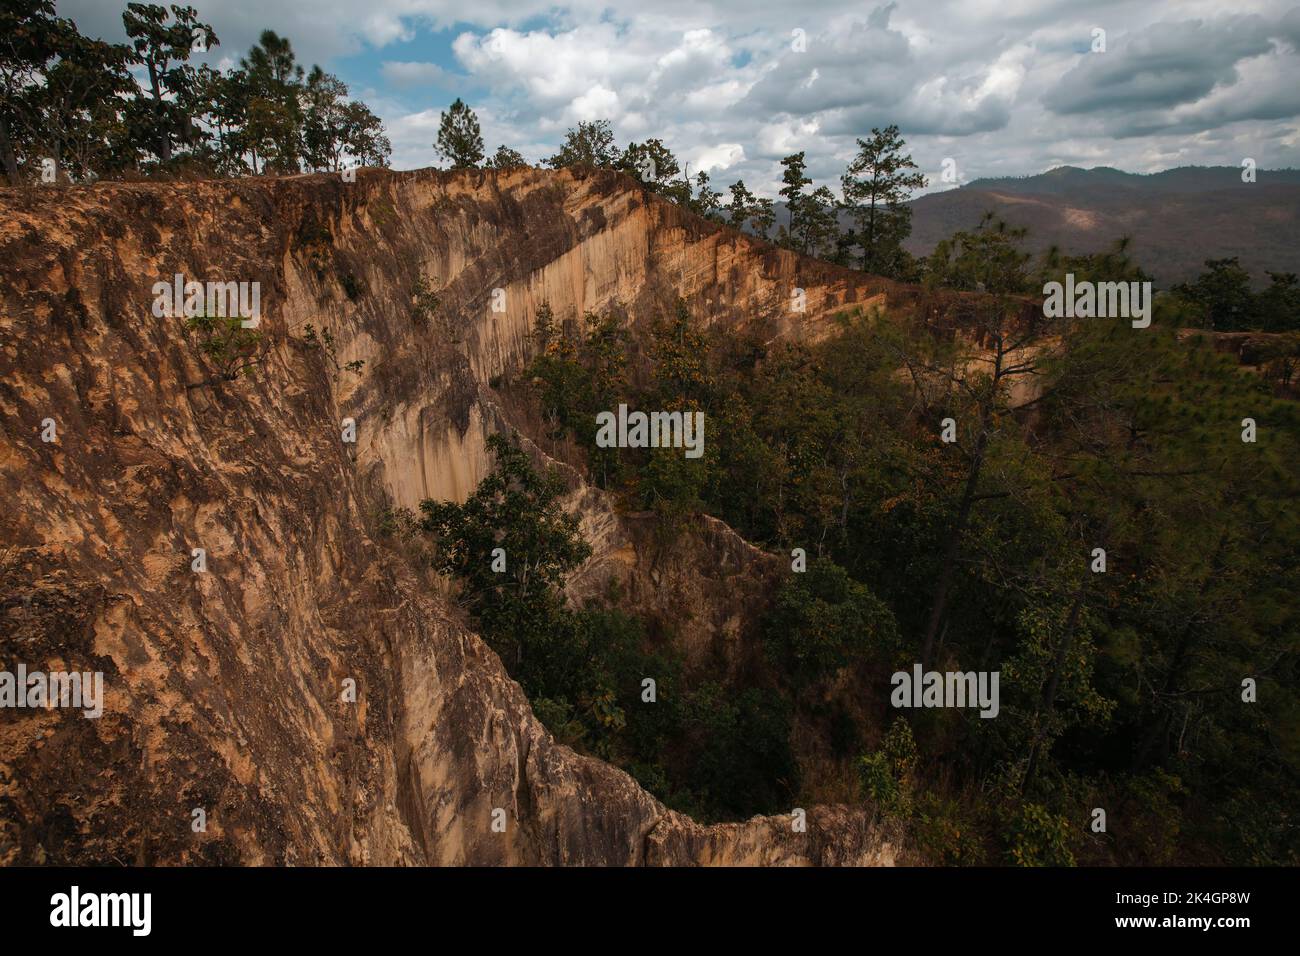 View of a canyon and mountain landscape in northern Thailand. Stock Photo